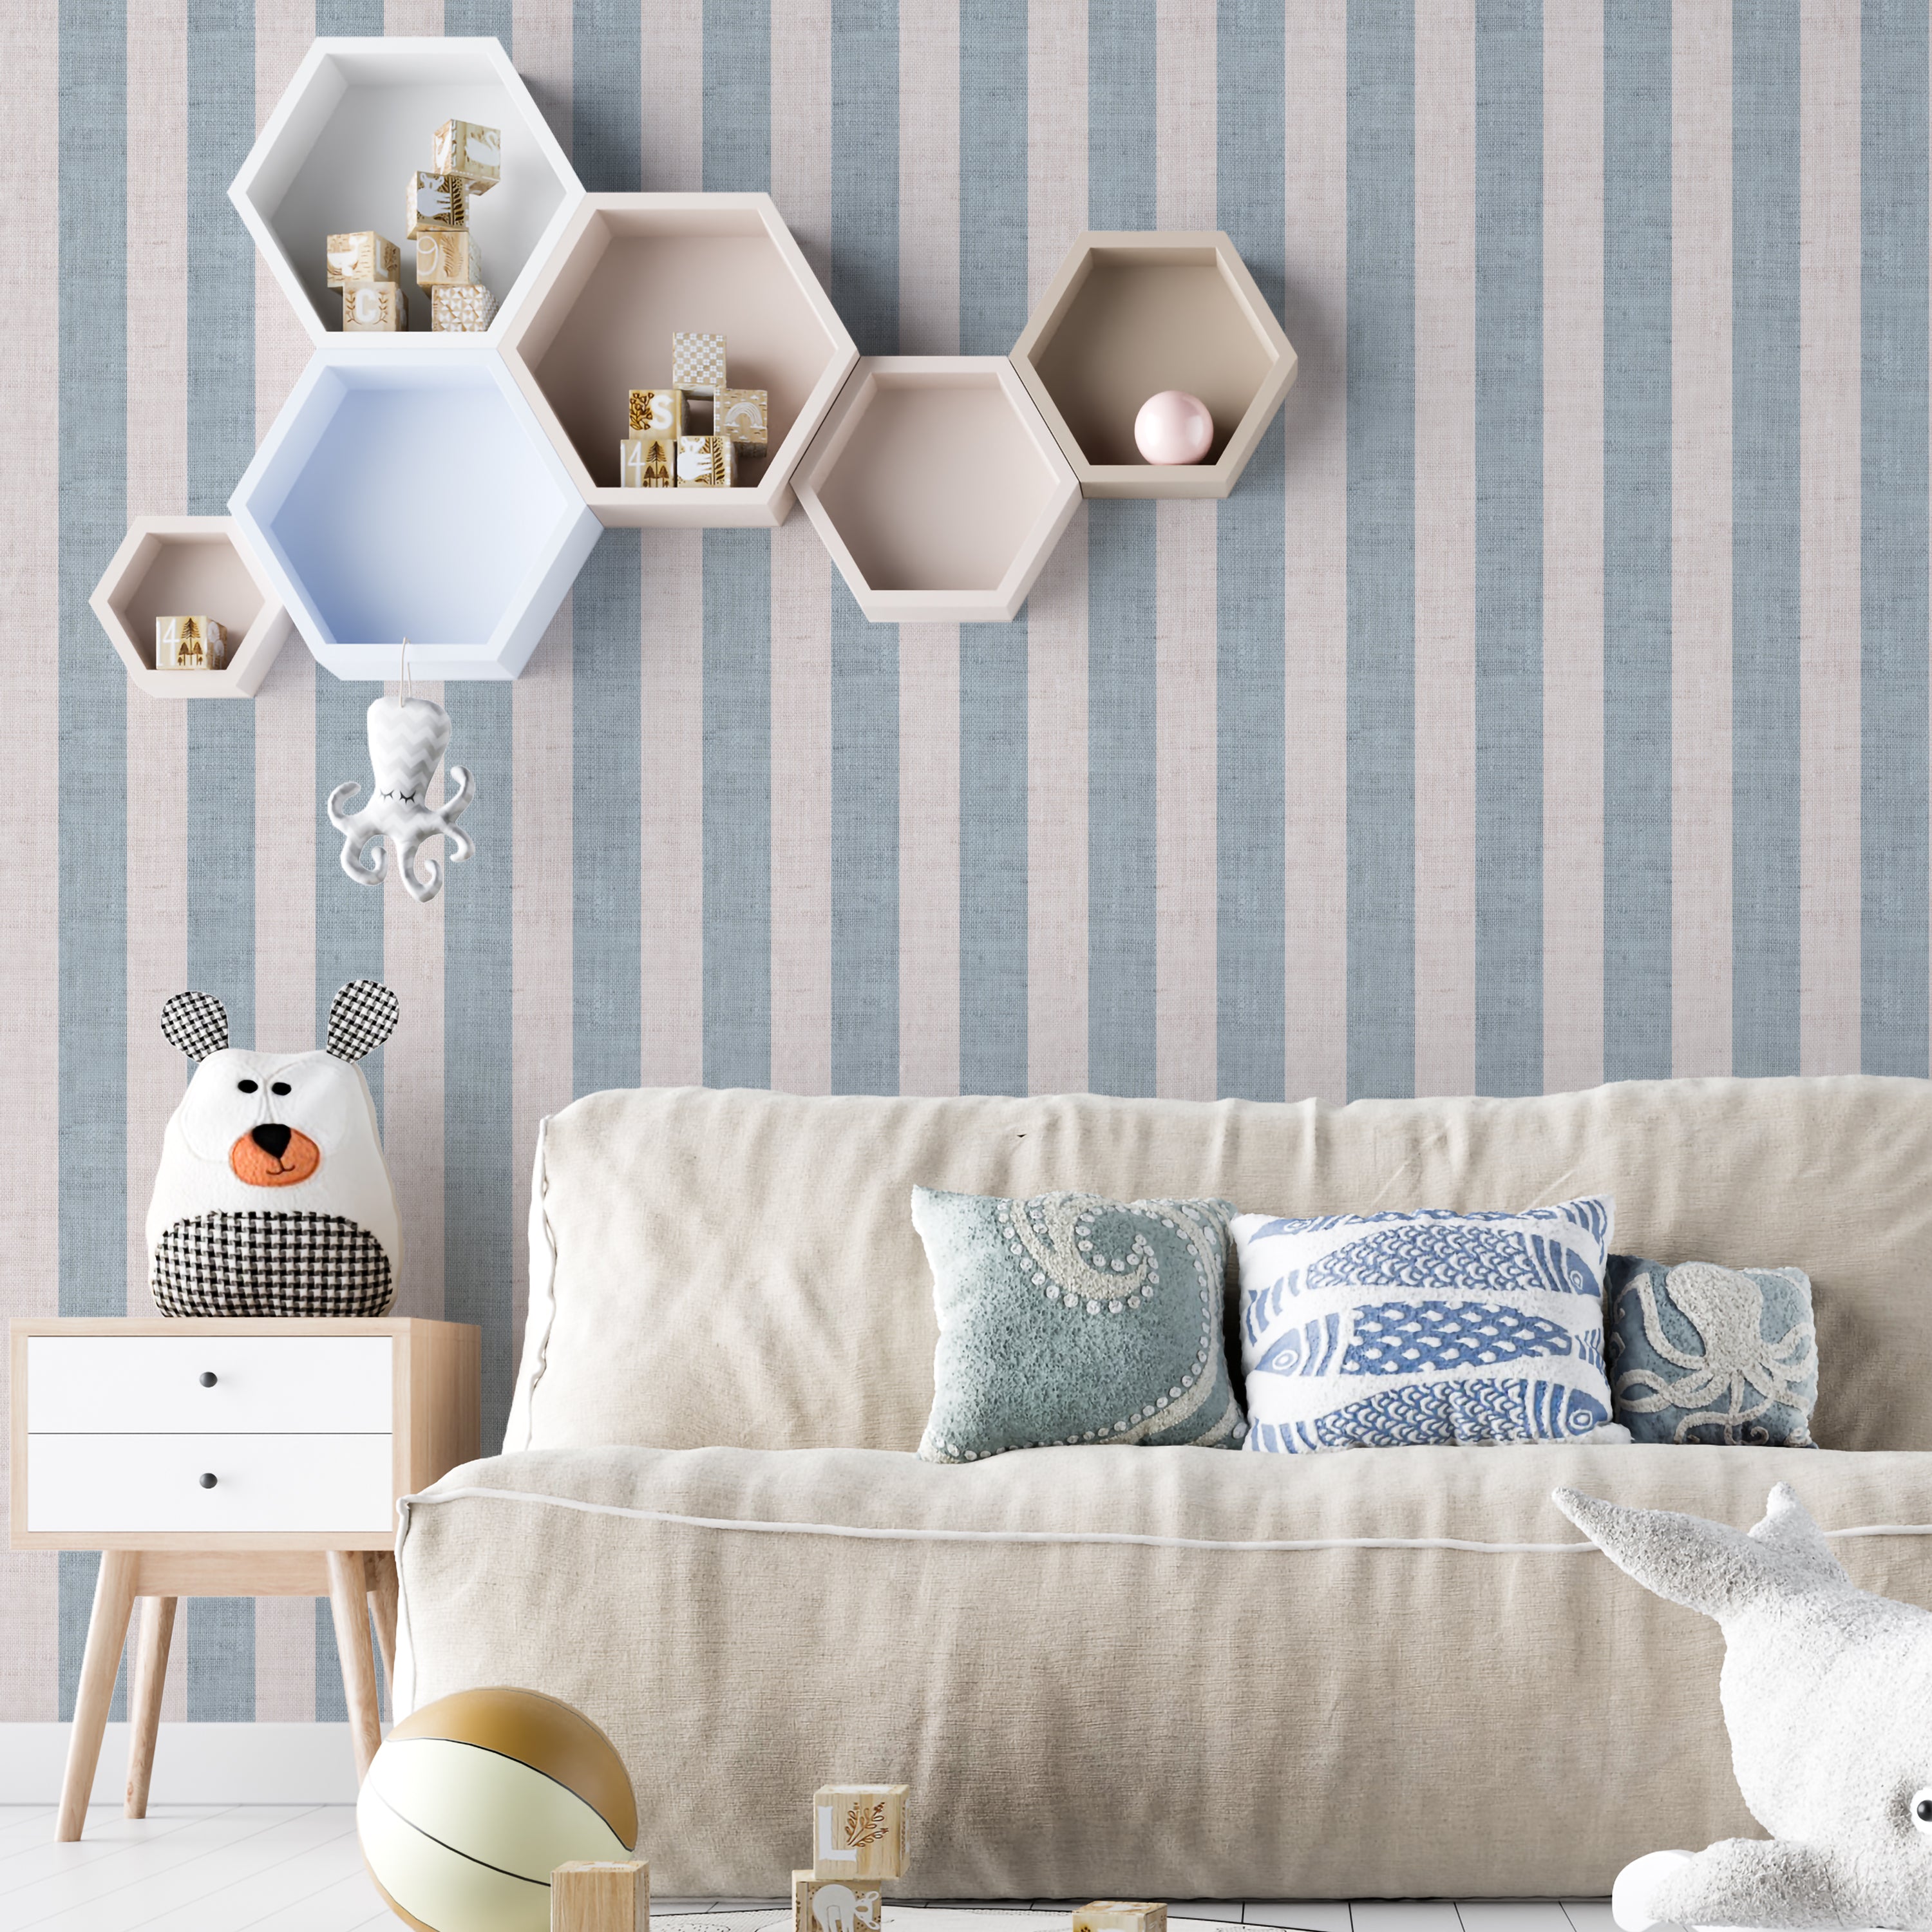 A cozy living room scene showcasing the Ticking Fabrics 7 II Wallpaper with vertical blue and cream stripes. The room includes a neutral-colored sofa with decorative pillows, hexagonal wall shelves, and playful children’s toys, highlighting the wallpaper’s versatility in a domestic setting.